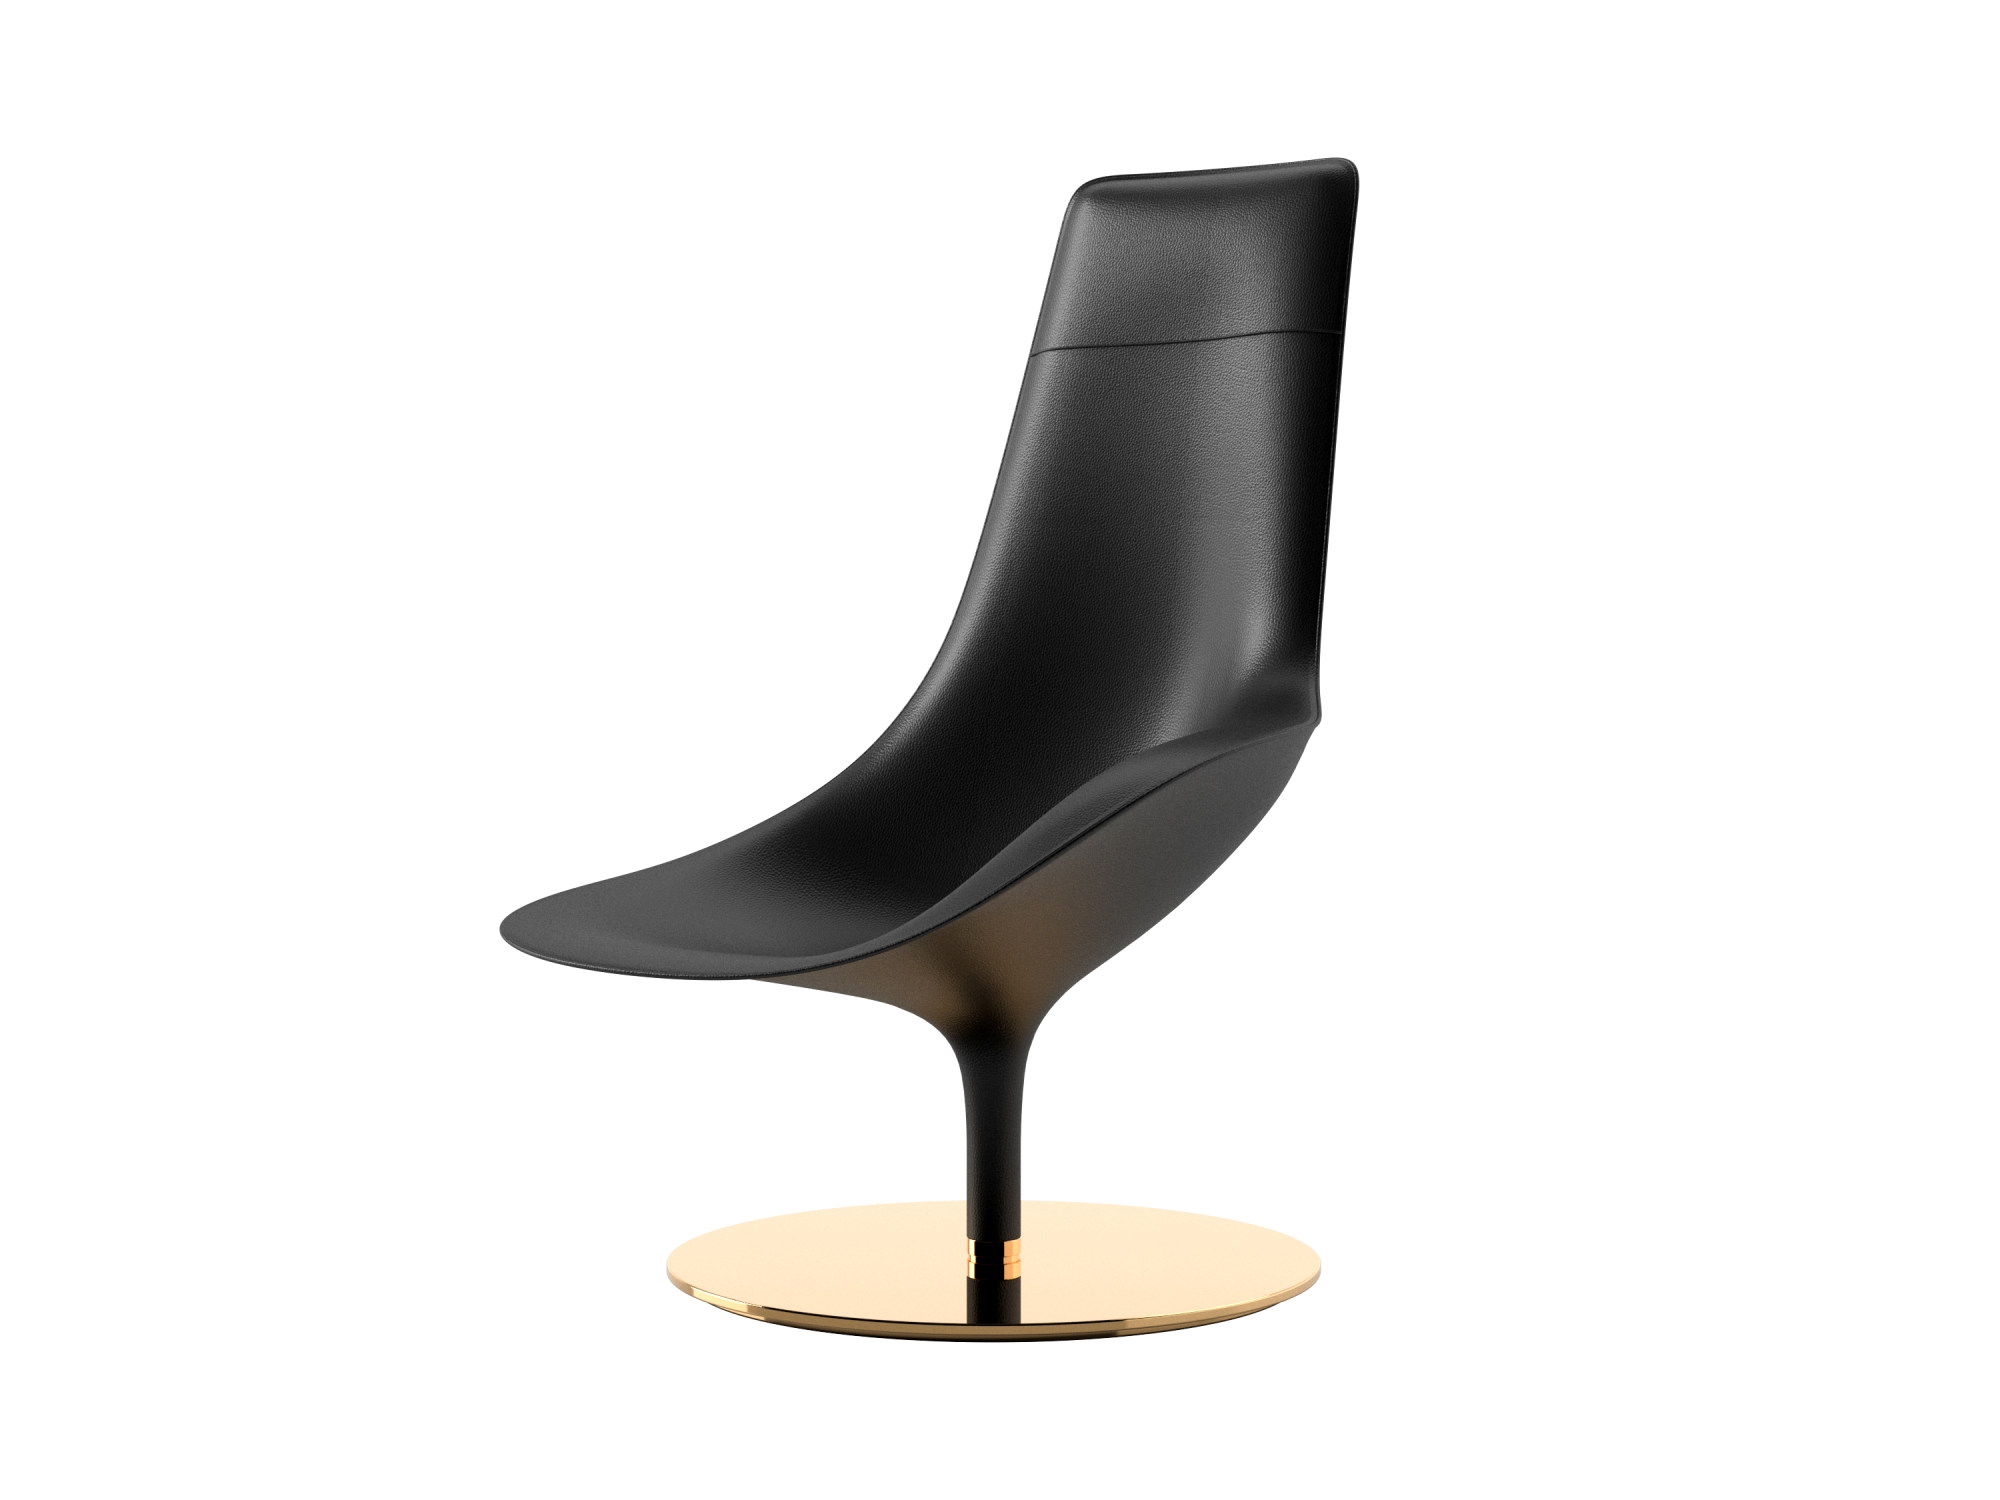 The Versace Venus Armchair, inspired by the sinuous curves of the female form. Photo: Versace